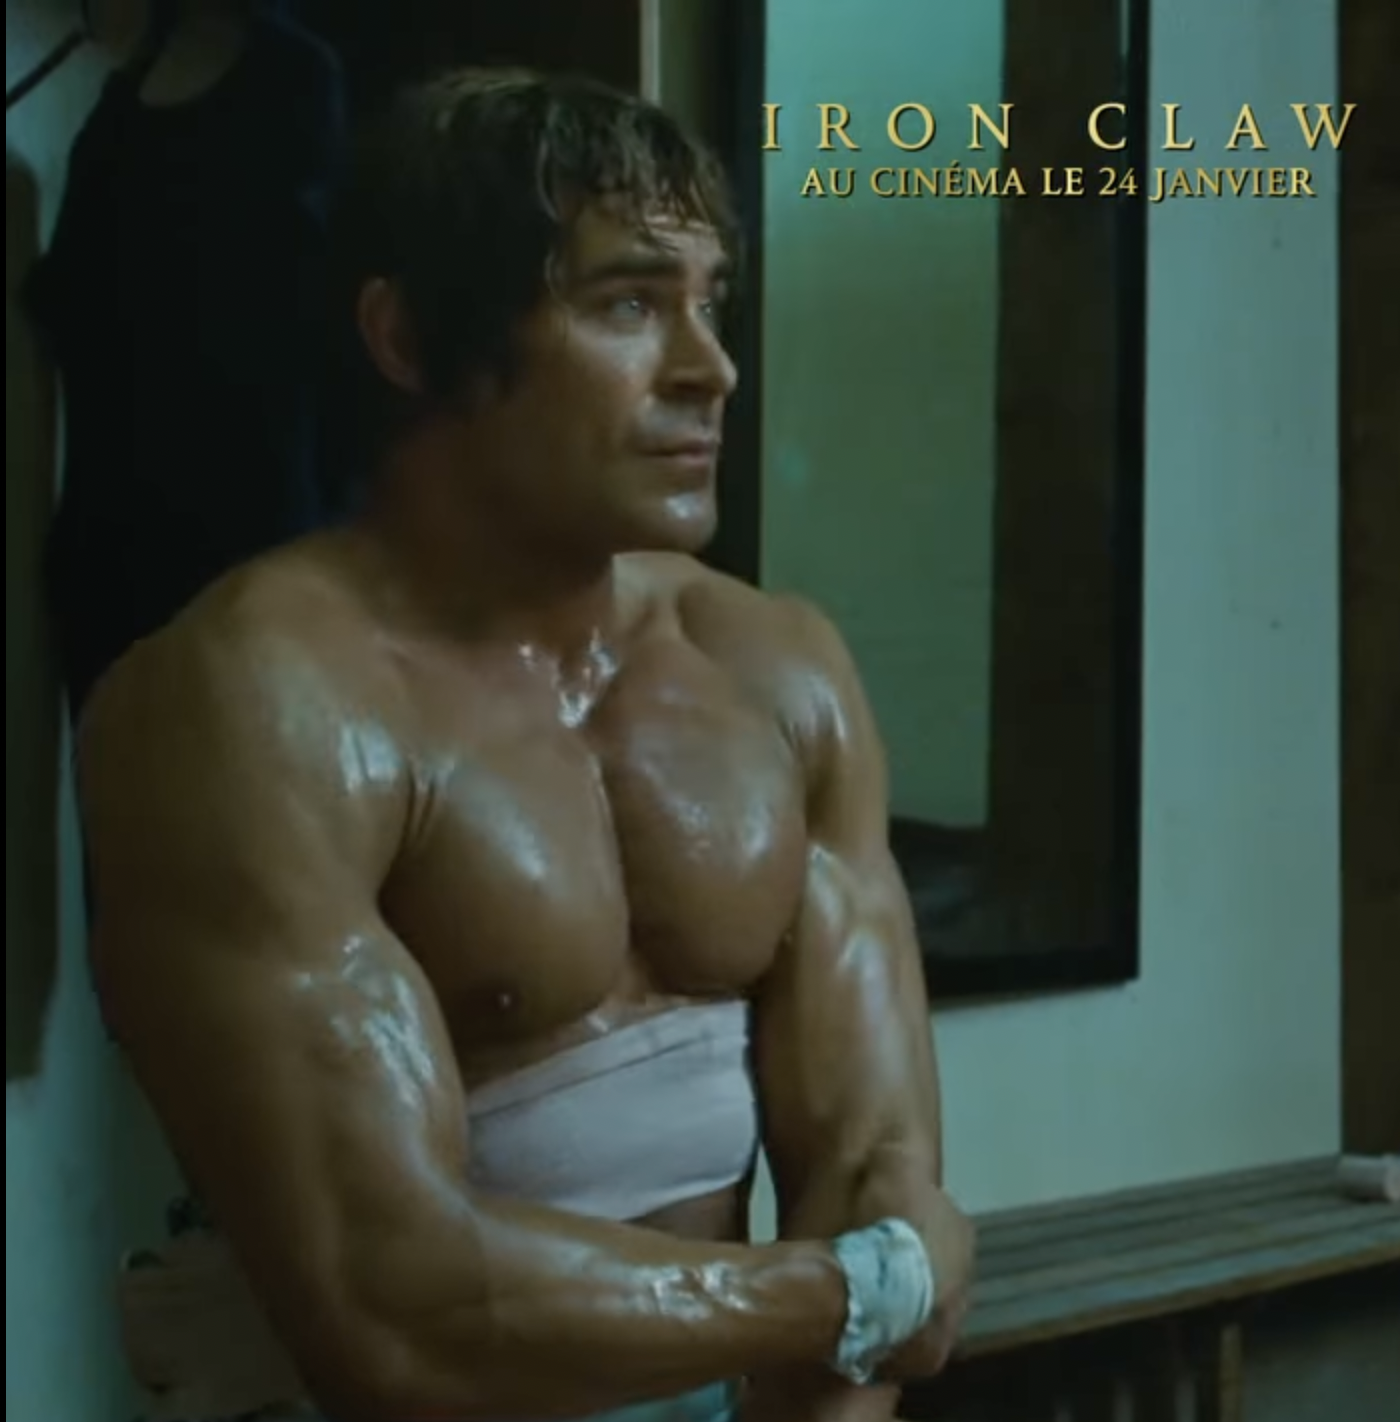 Zac Efron in a scene from a trailer of "The Iron Claw" | Source: facebook/gamingpop